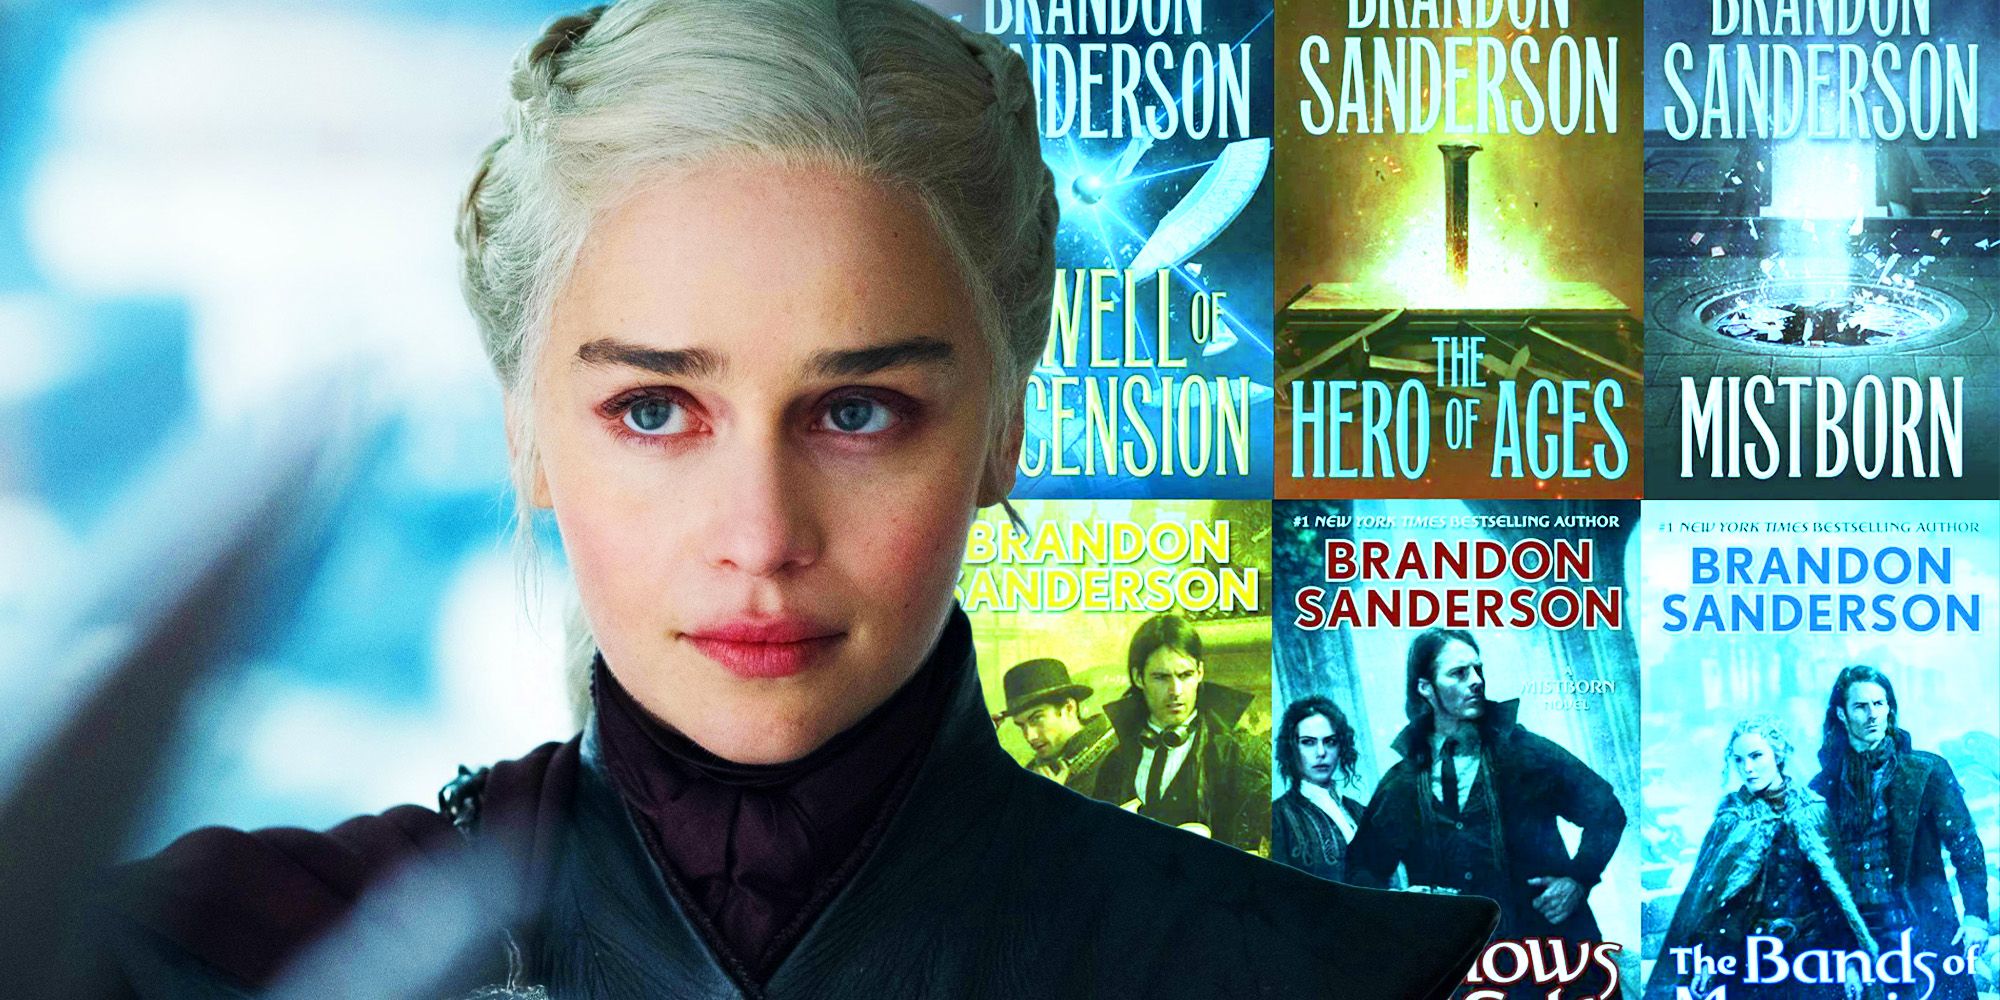 An image of Emilia Clarke as Daenerys Targaryen in Game of Thrones over images of Brandon Sanderson's Mistborn book covers